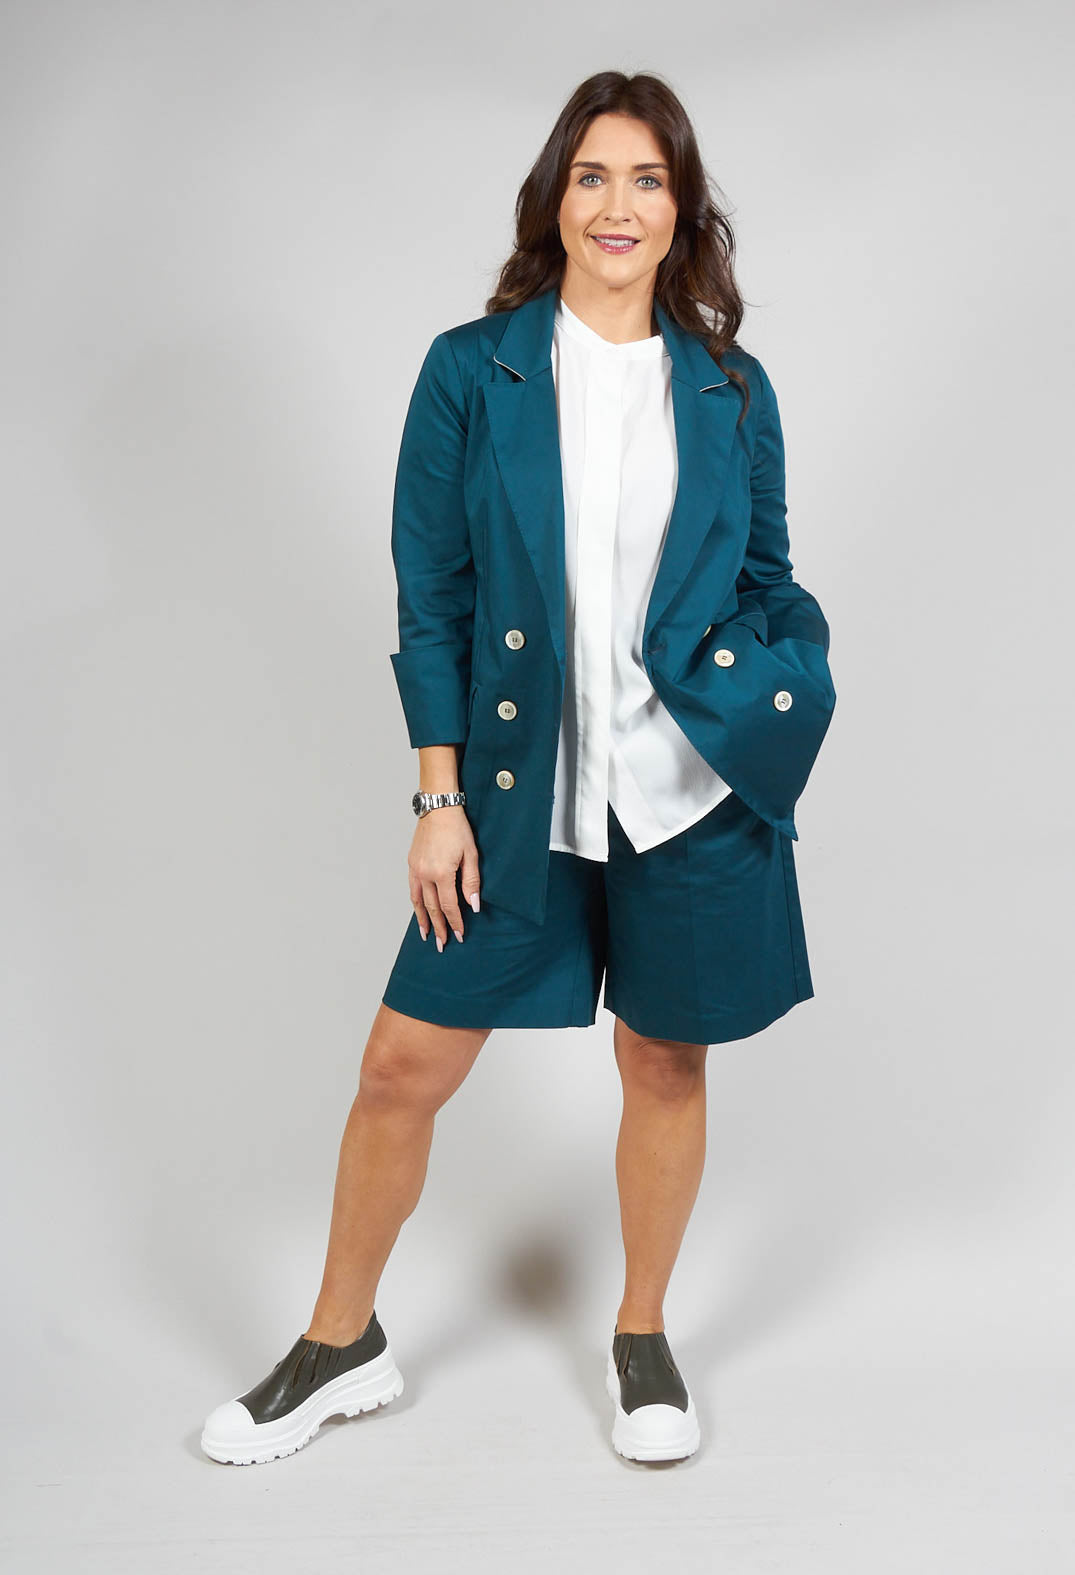 tailored jacket in green with buttons for fastening